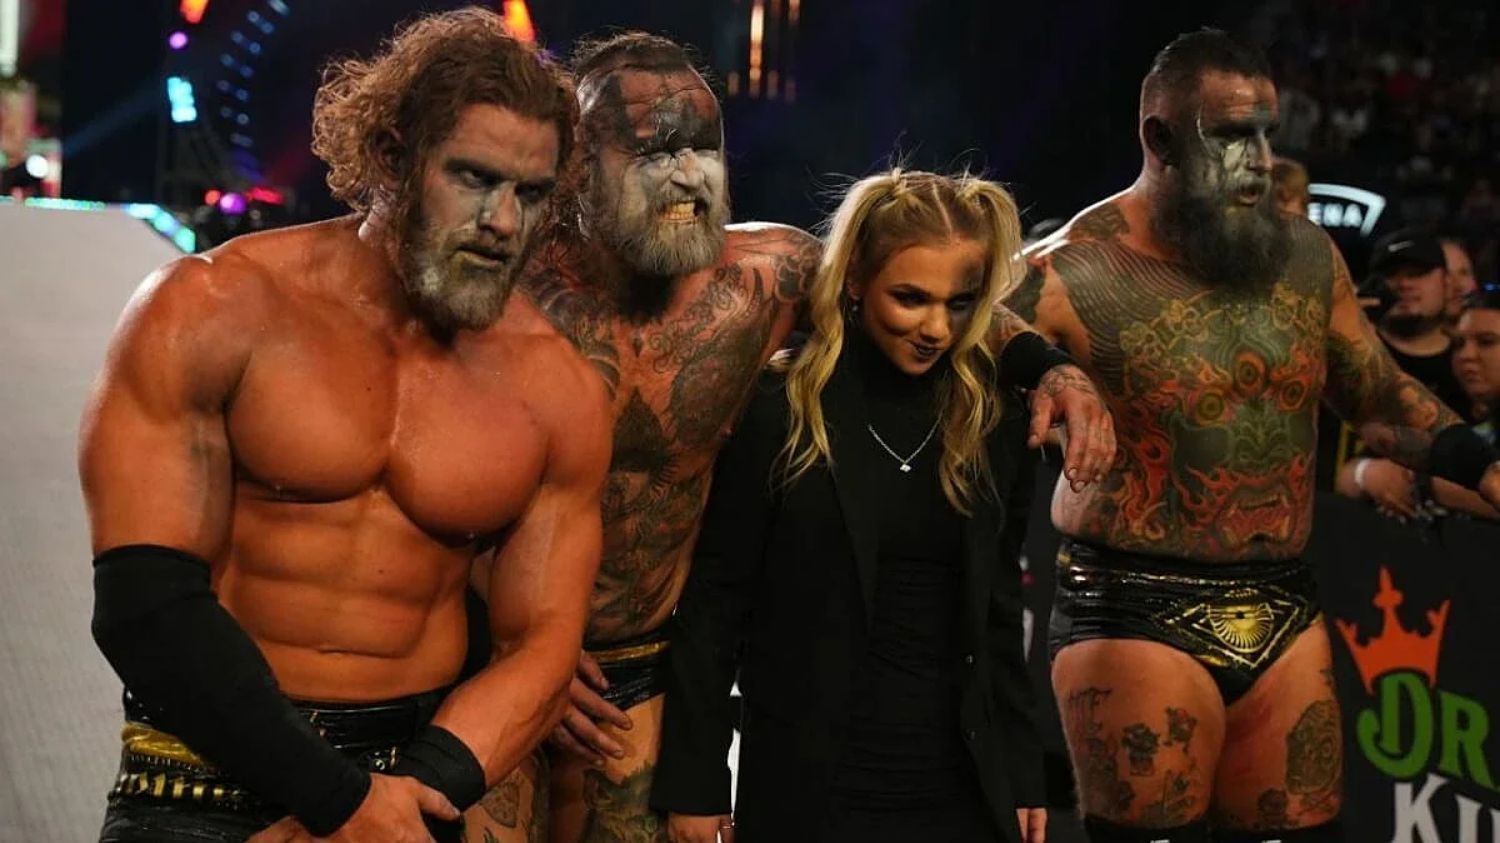 What would happen if The House of Black were to show up on WWE television. Who would they feud with? What type of dream matches could we expect?